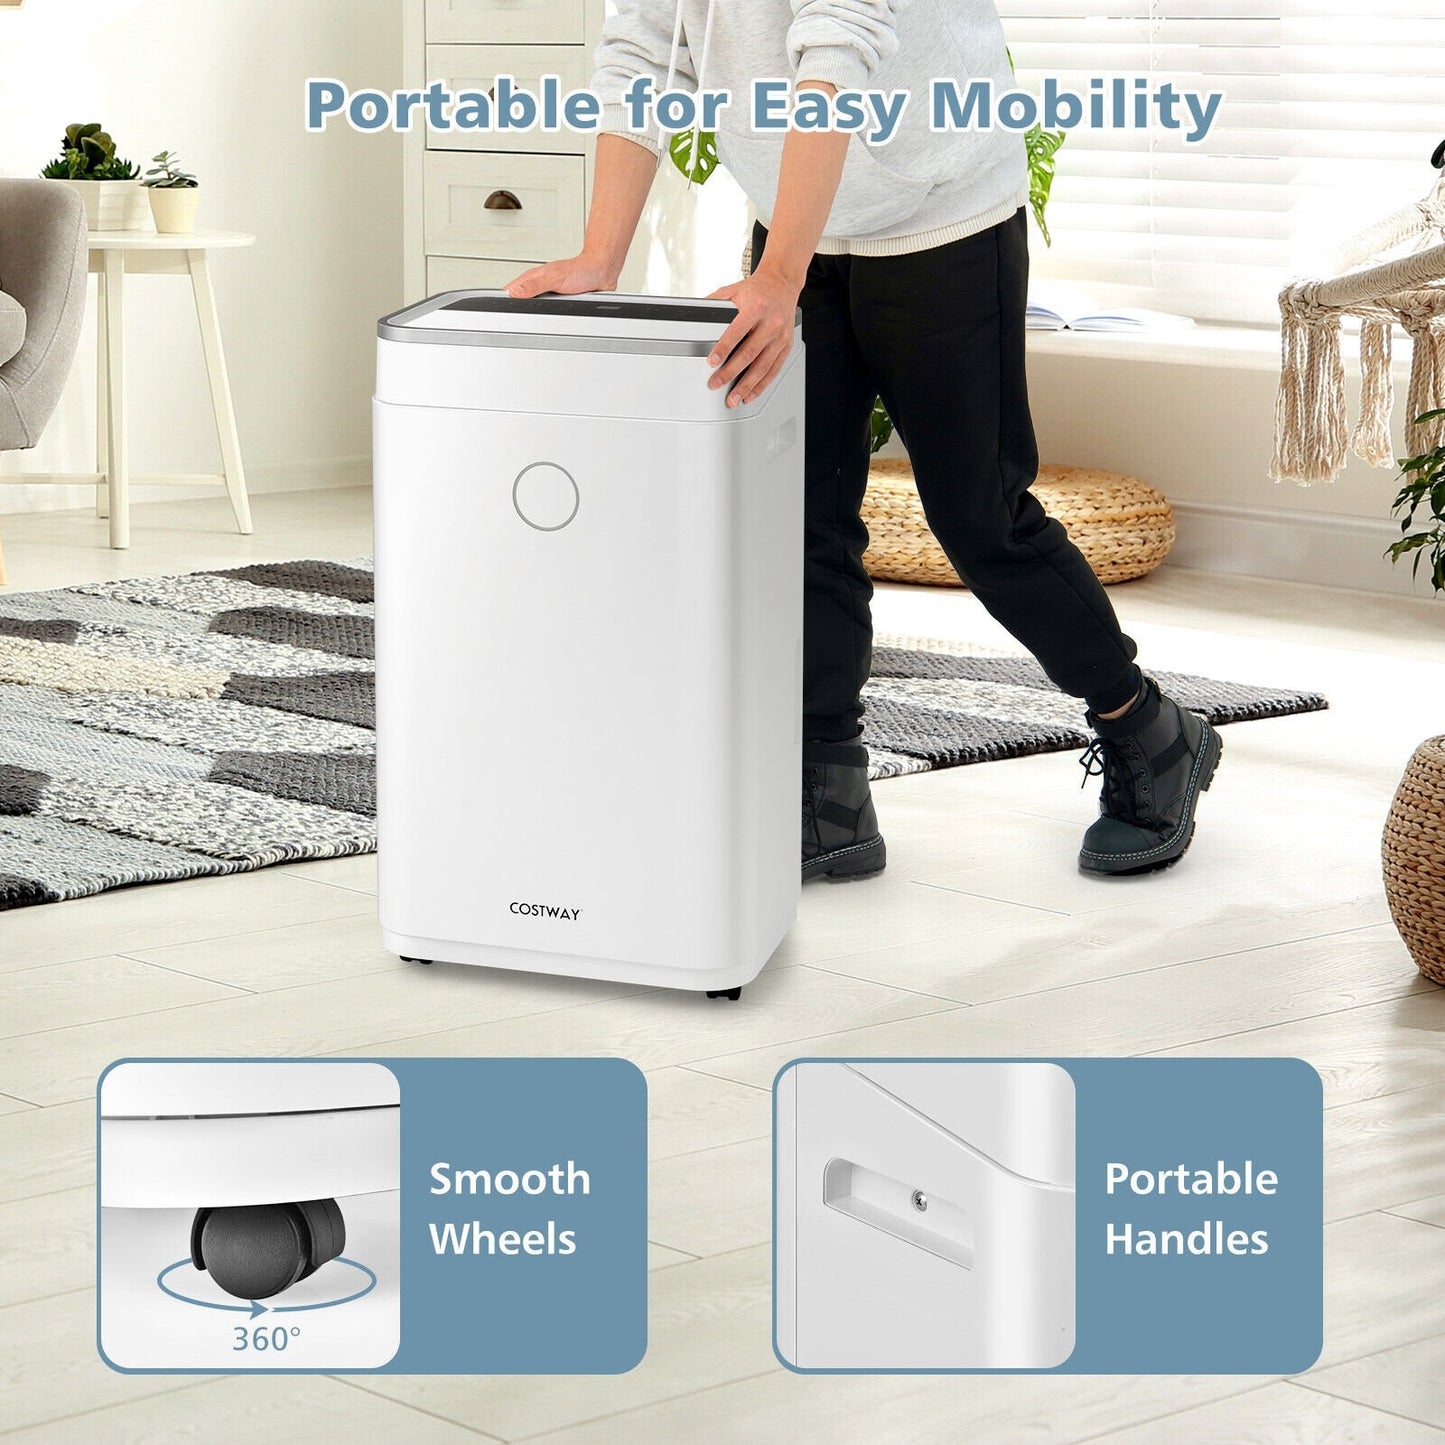 60-Pint Dehumidifier for Home and Basements 4000 Sq. Ft with 3-Color Digital Display, White